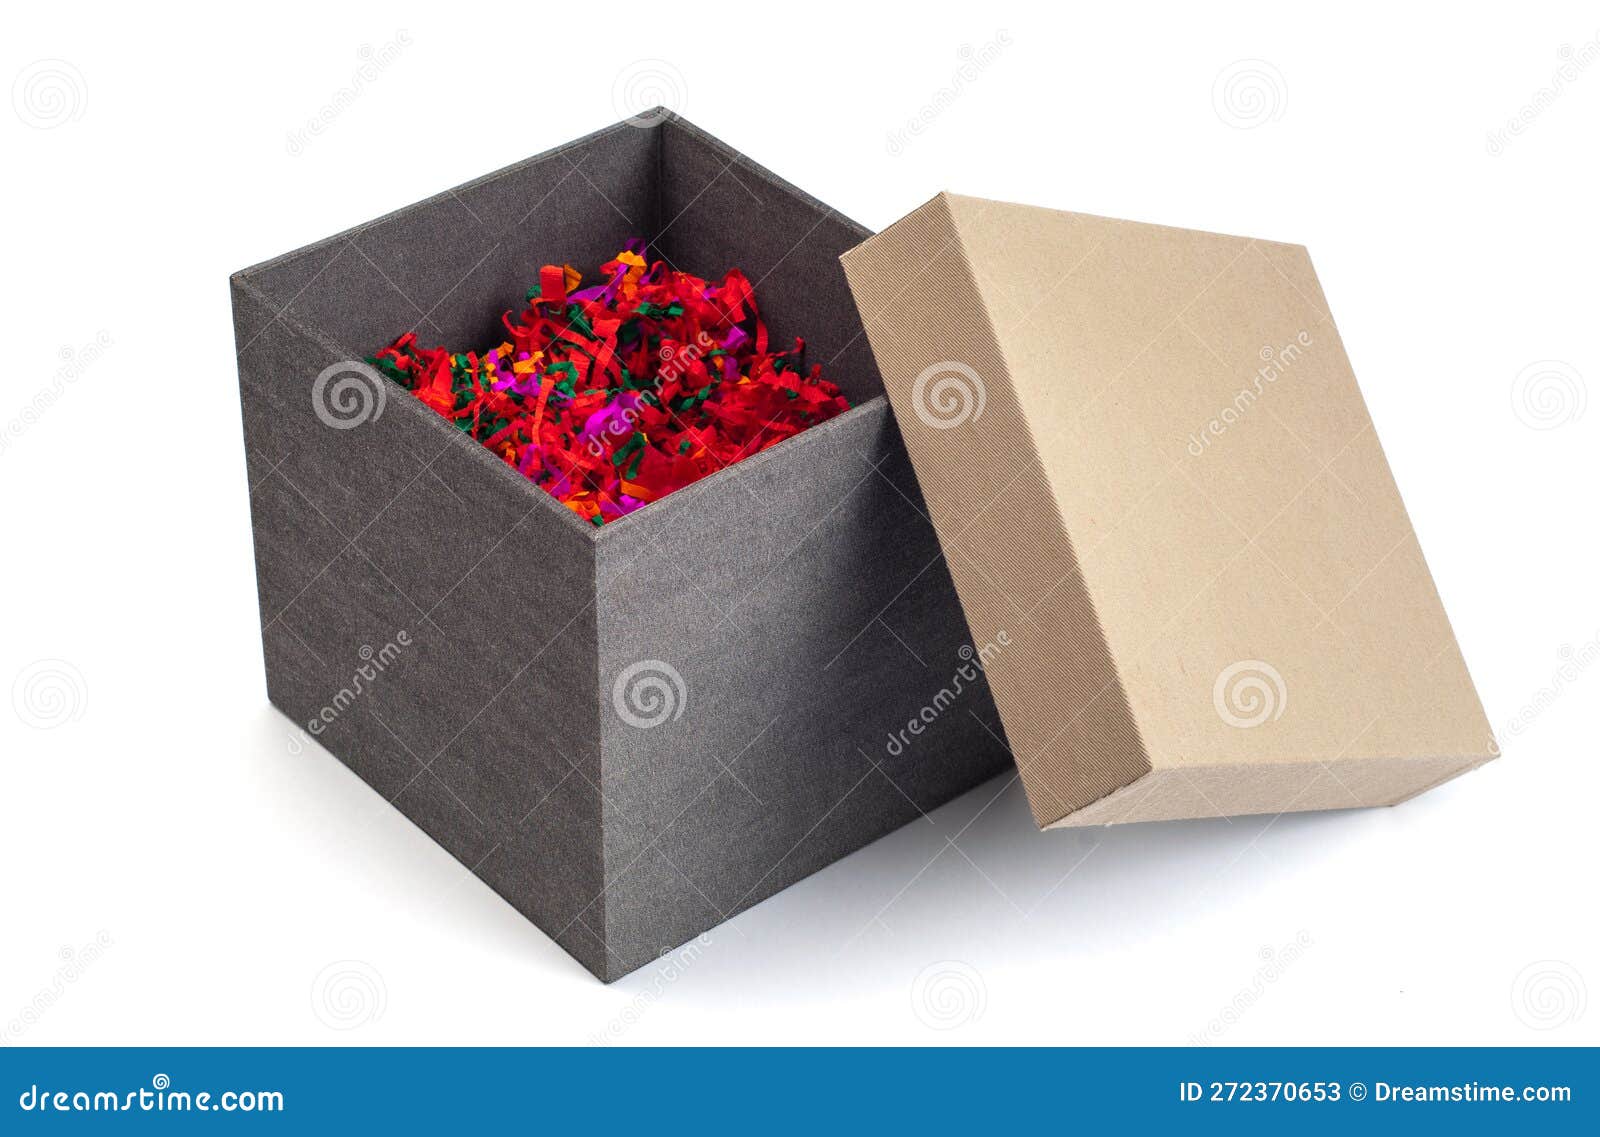 Hard Paper Gift Box or Storage Contaner. Stock Image - Image of